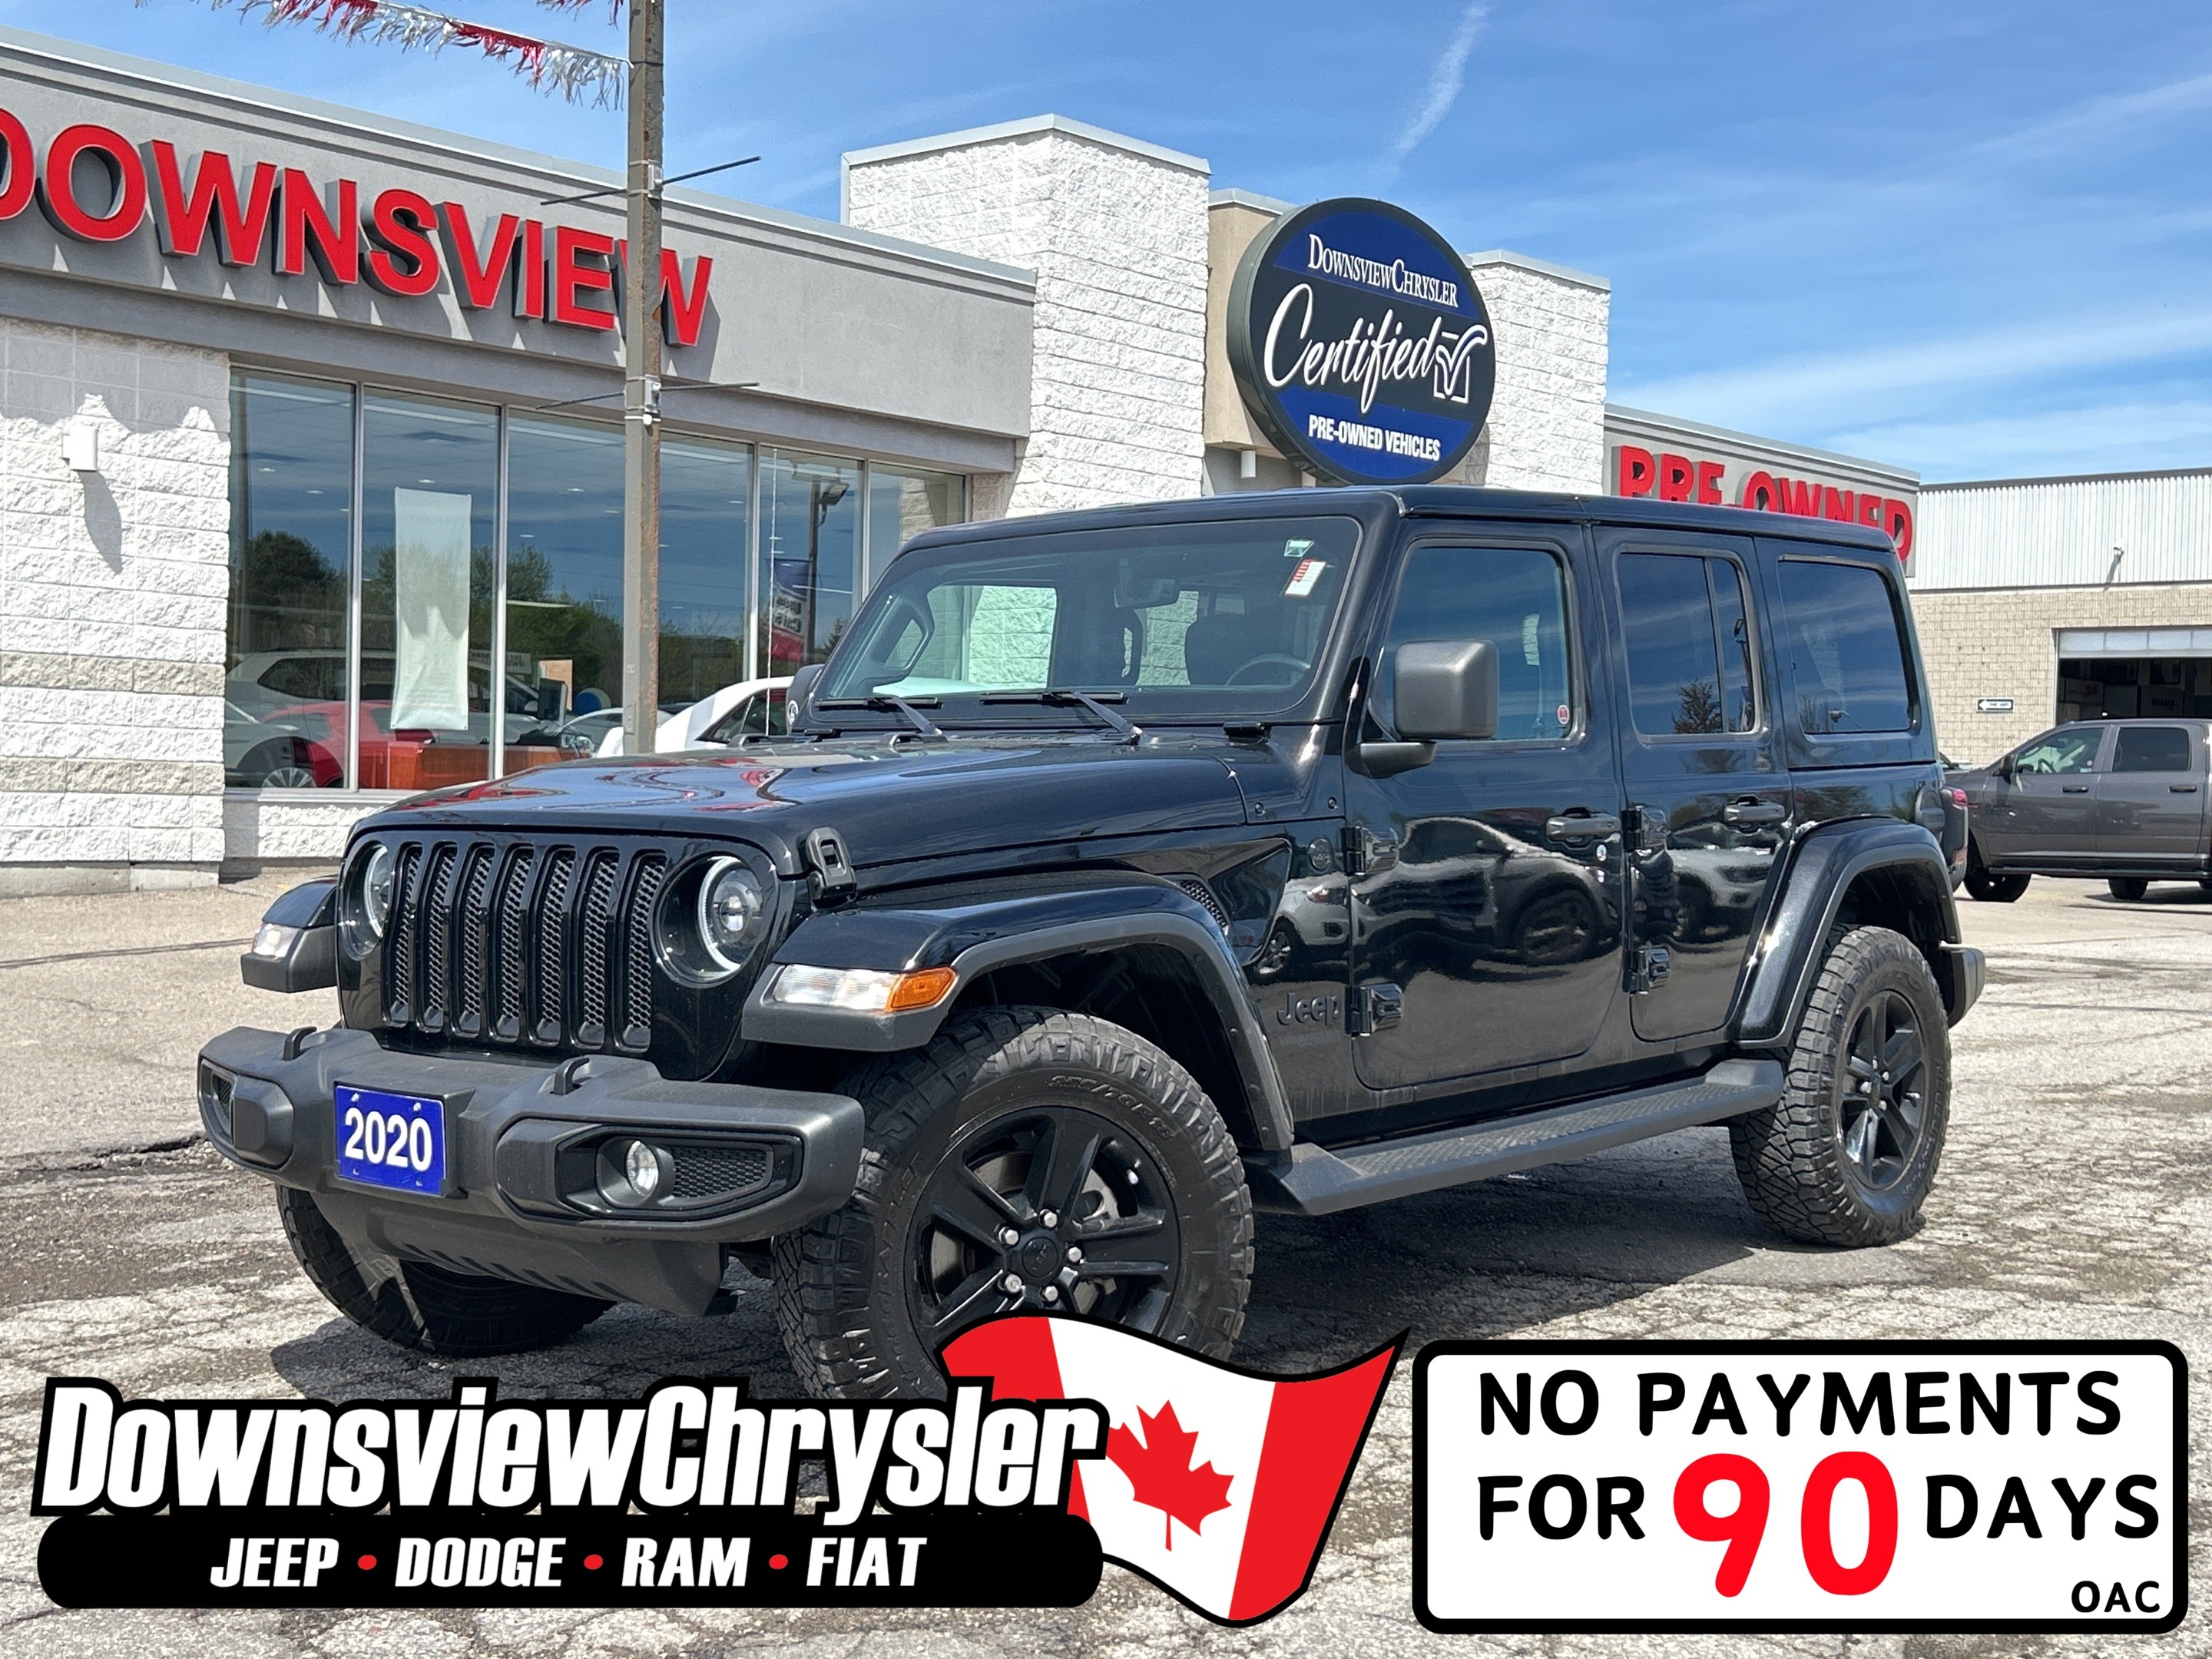 2020 Jeep WRANGLER UNLIMITED Sahara Altitude w/Safety Group, NAV, Cold Weather